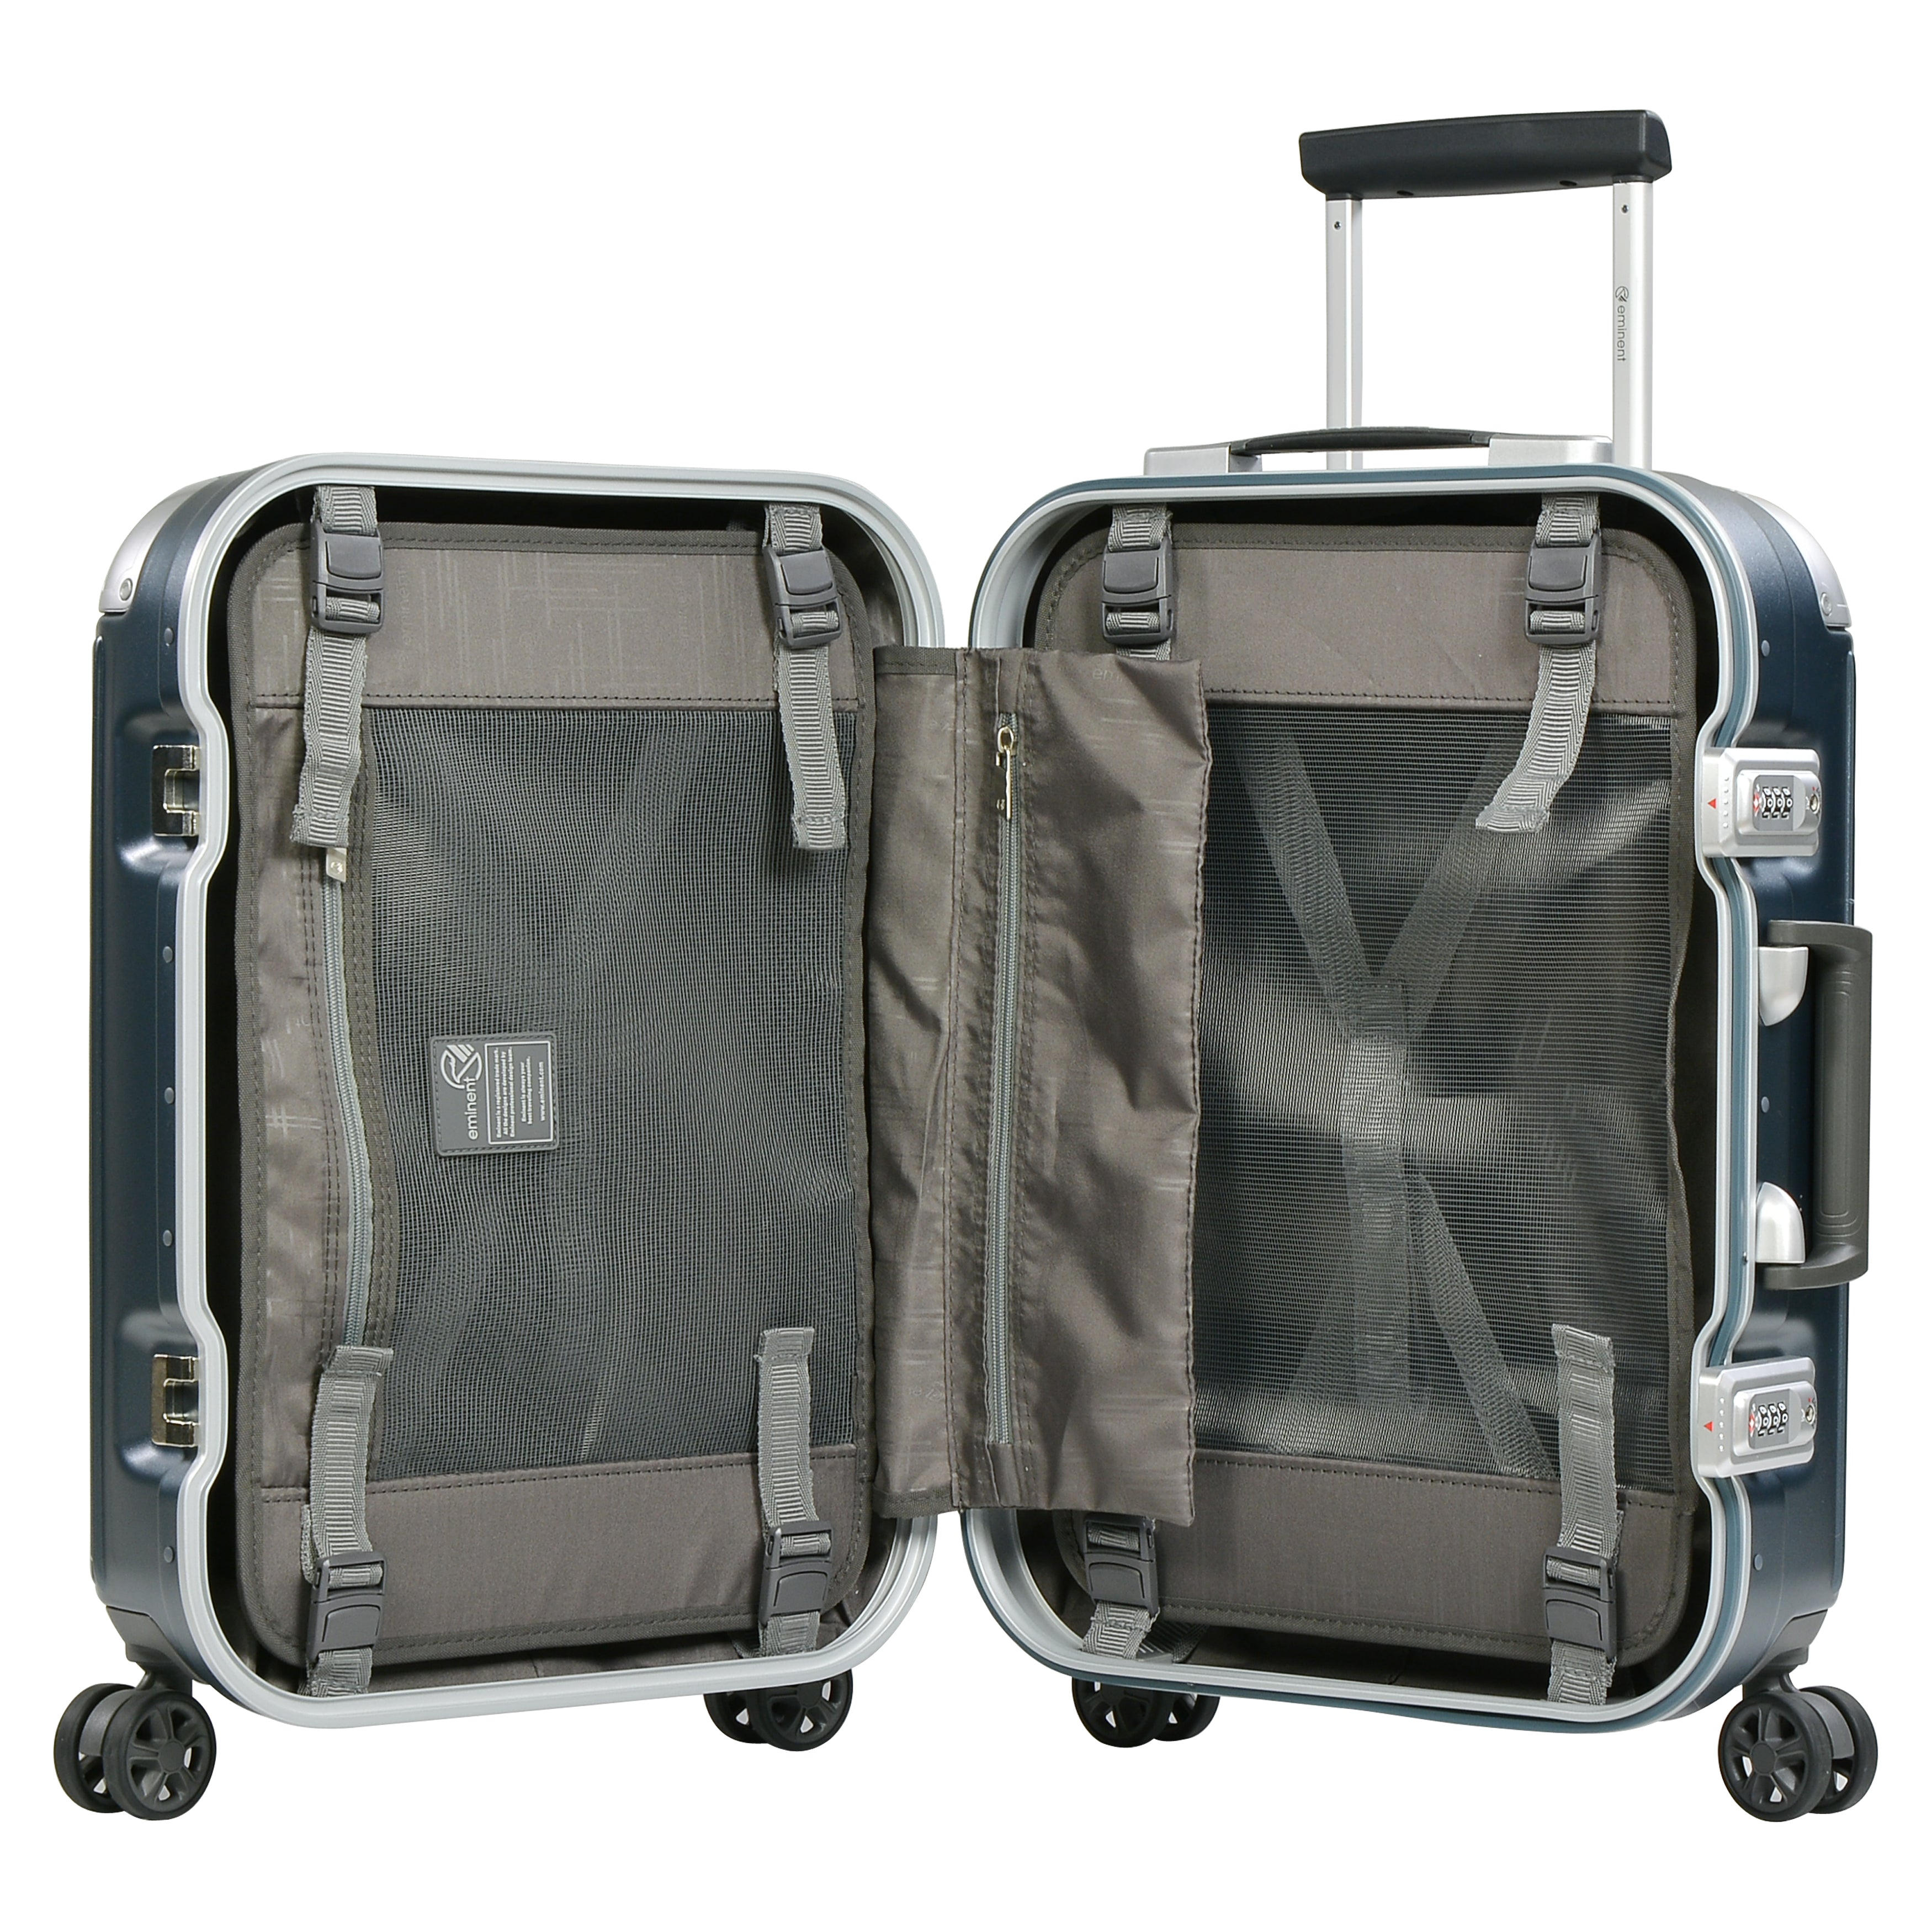 Eminent checked baggage 24" PC Frame Light Weight Spinner luggage Trolley bag (E9R5-24) - buyluggageonline